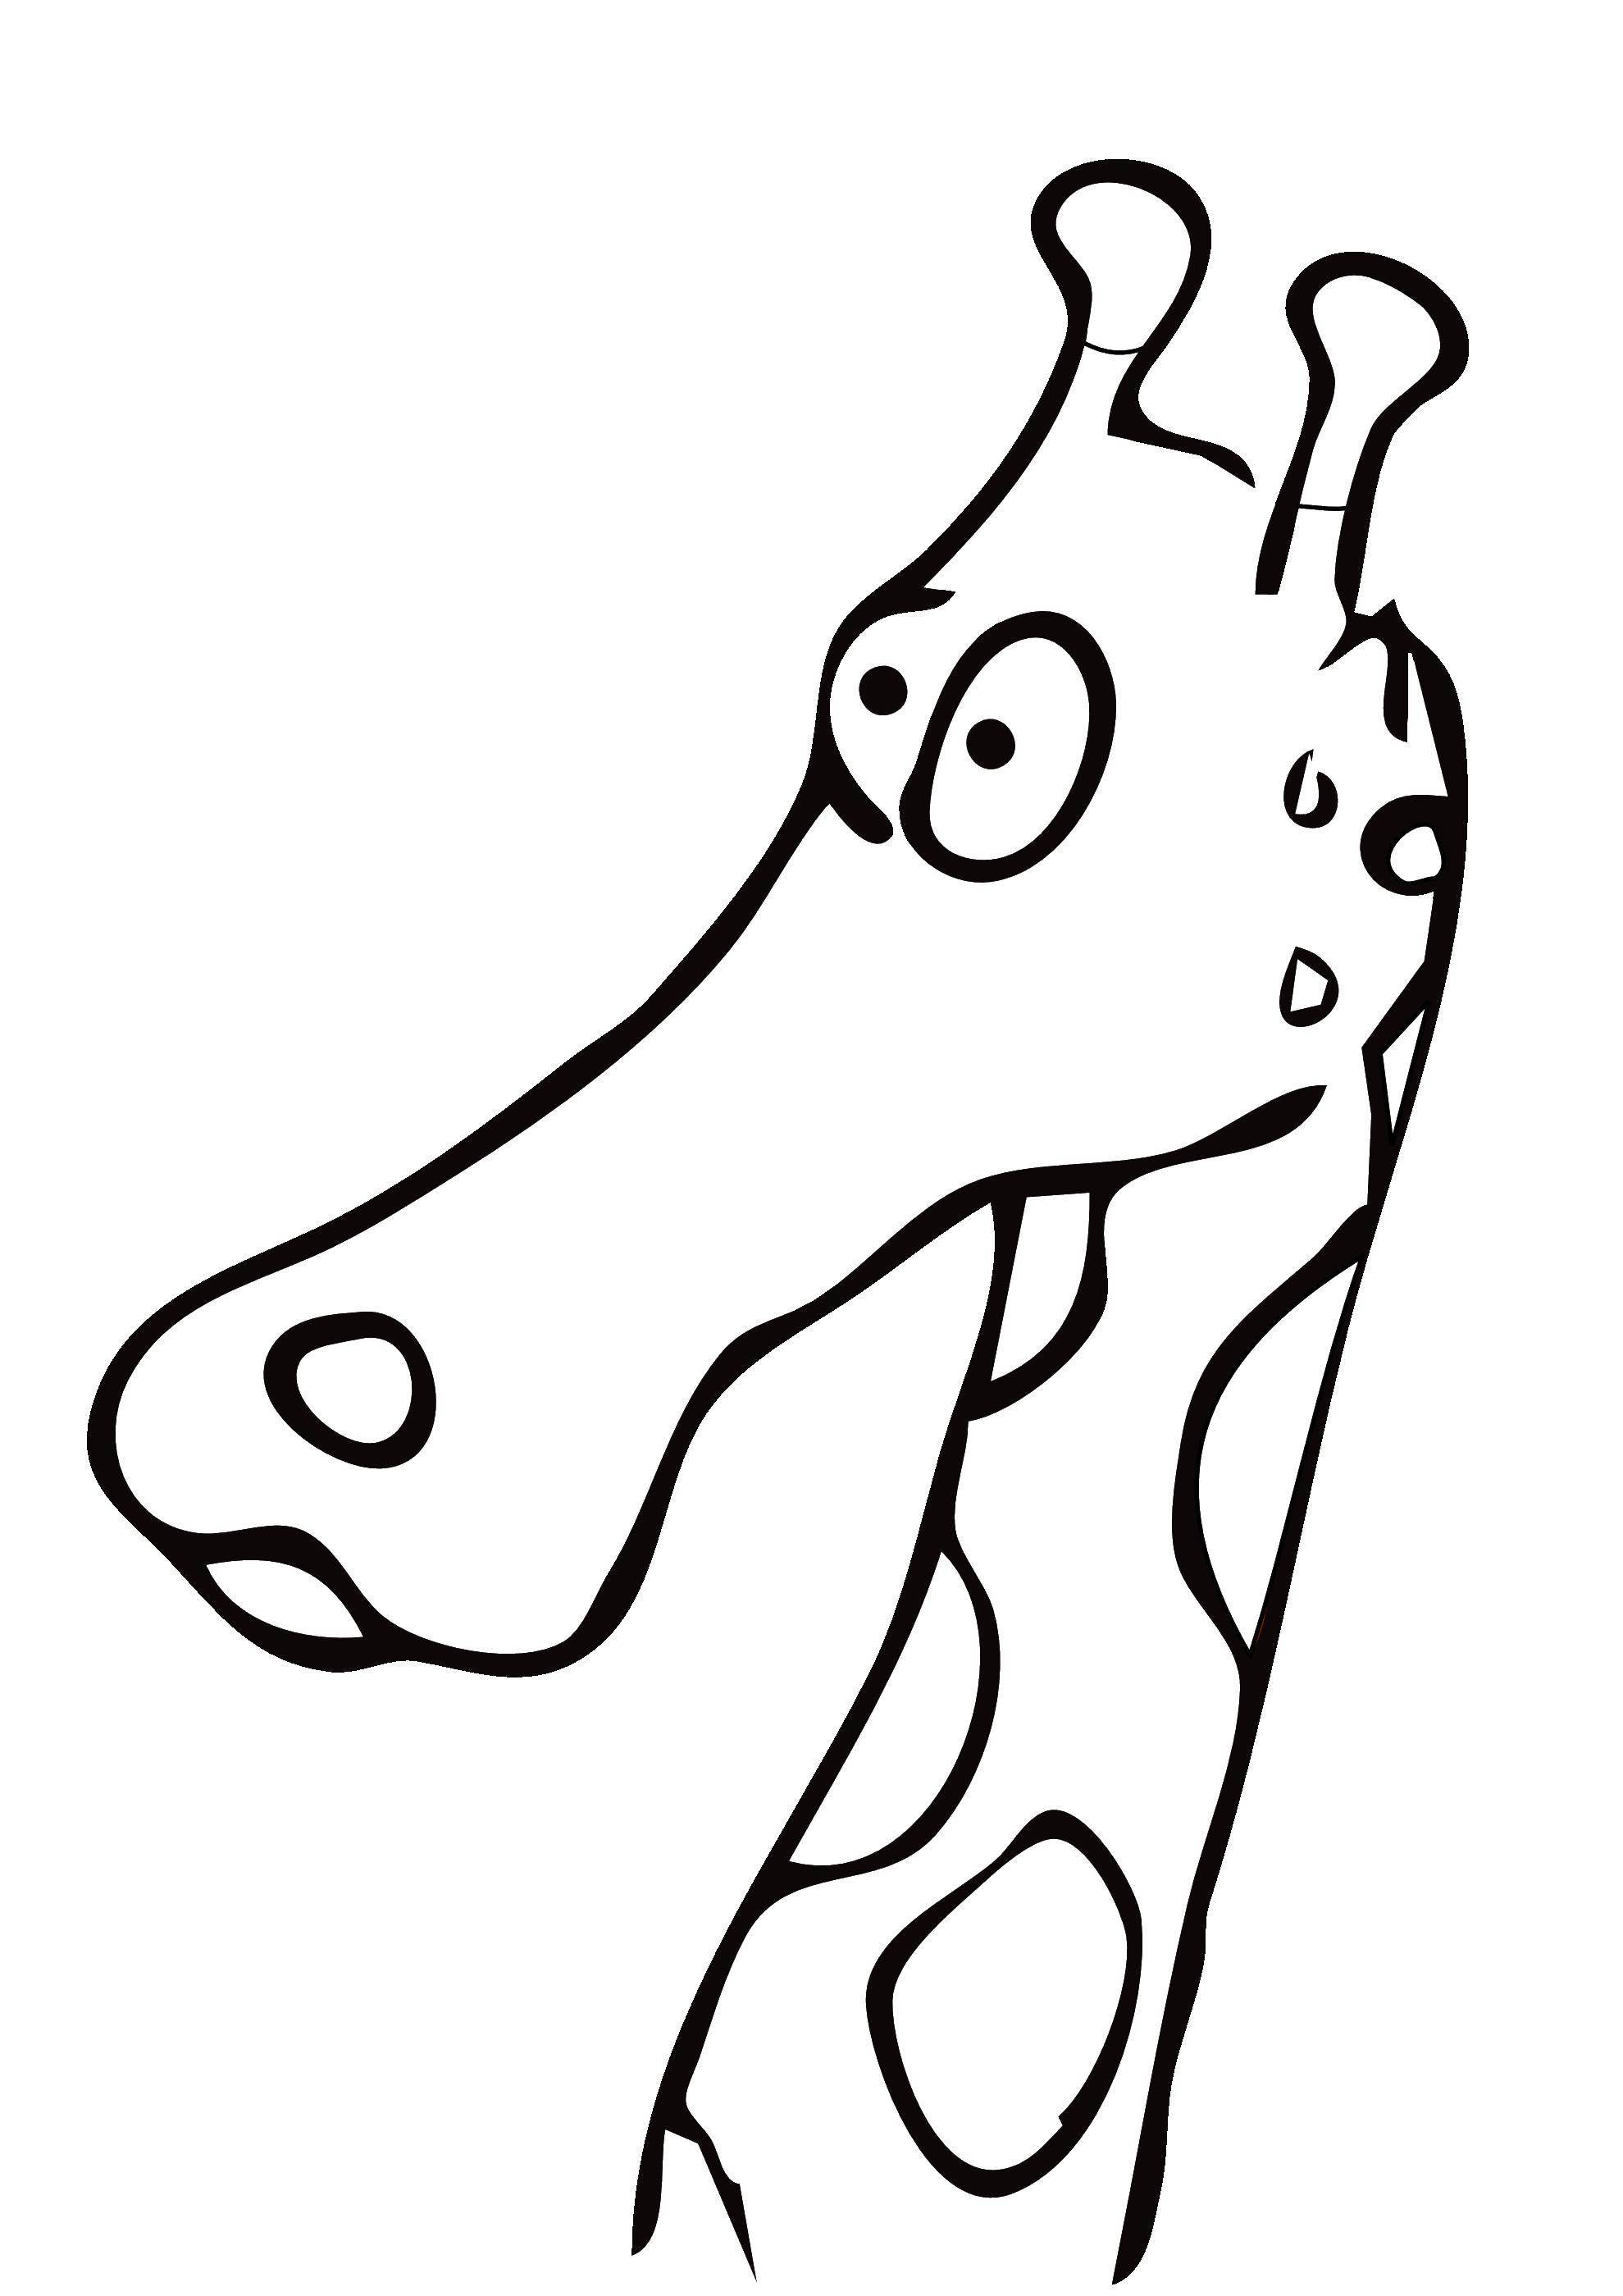 Coloring The head of a giraffe. Category The outline of a giraffe for cutting. Tags:  outline , giraffe.